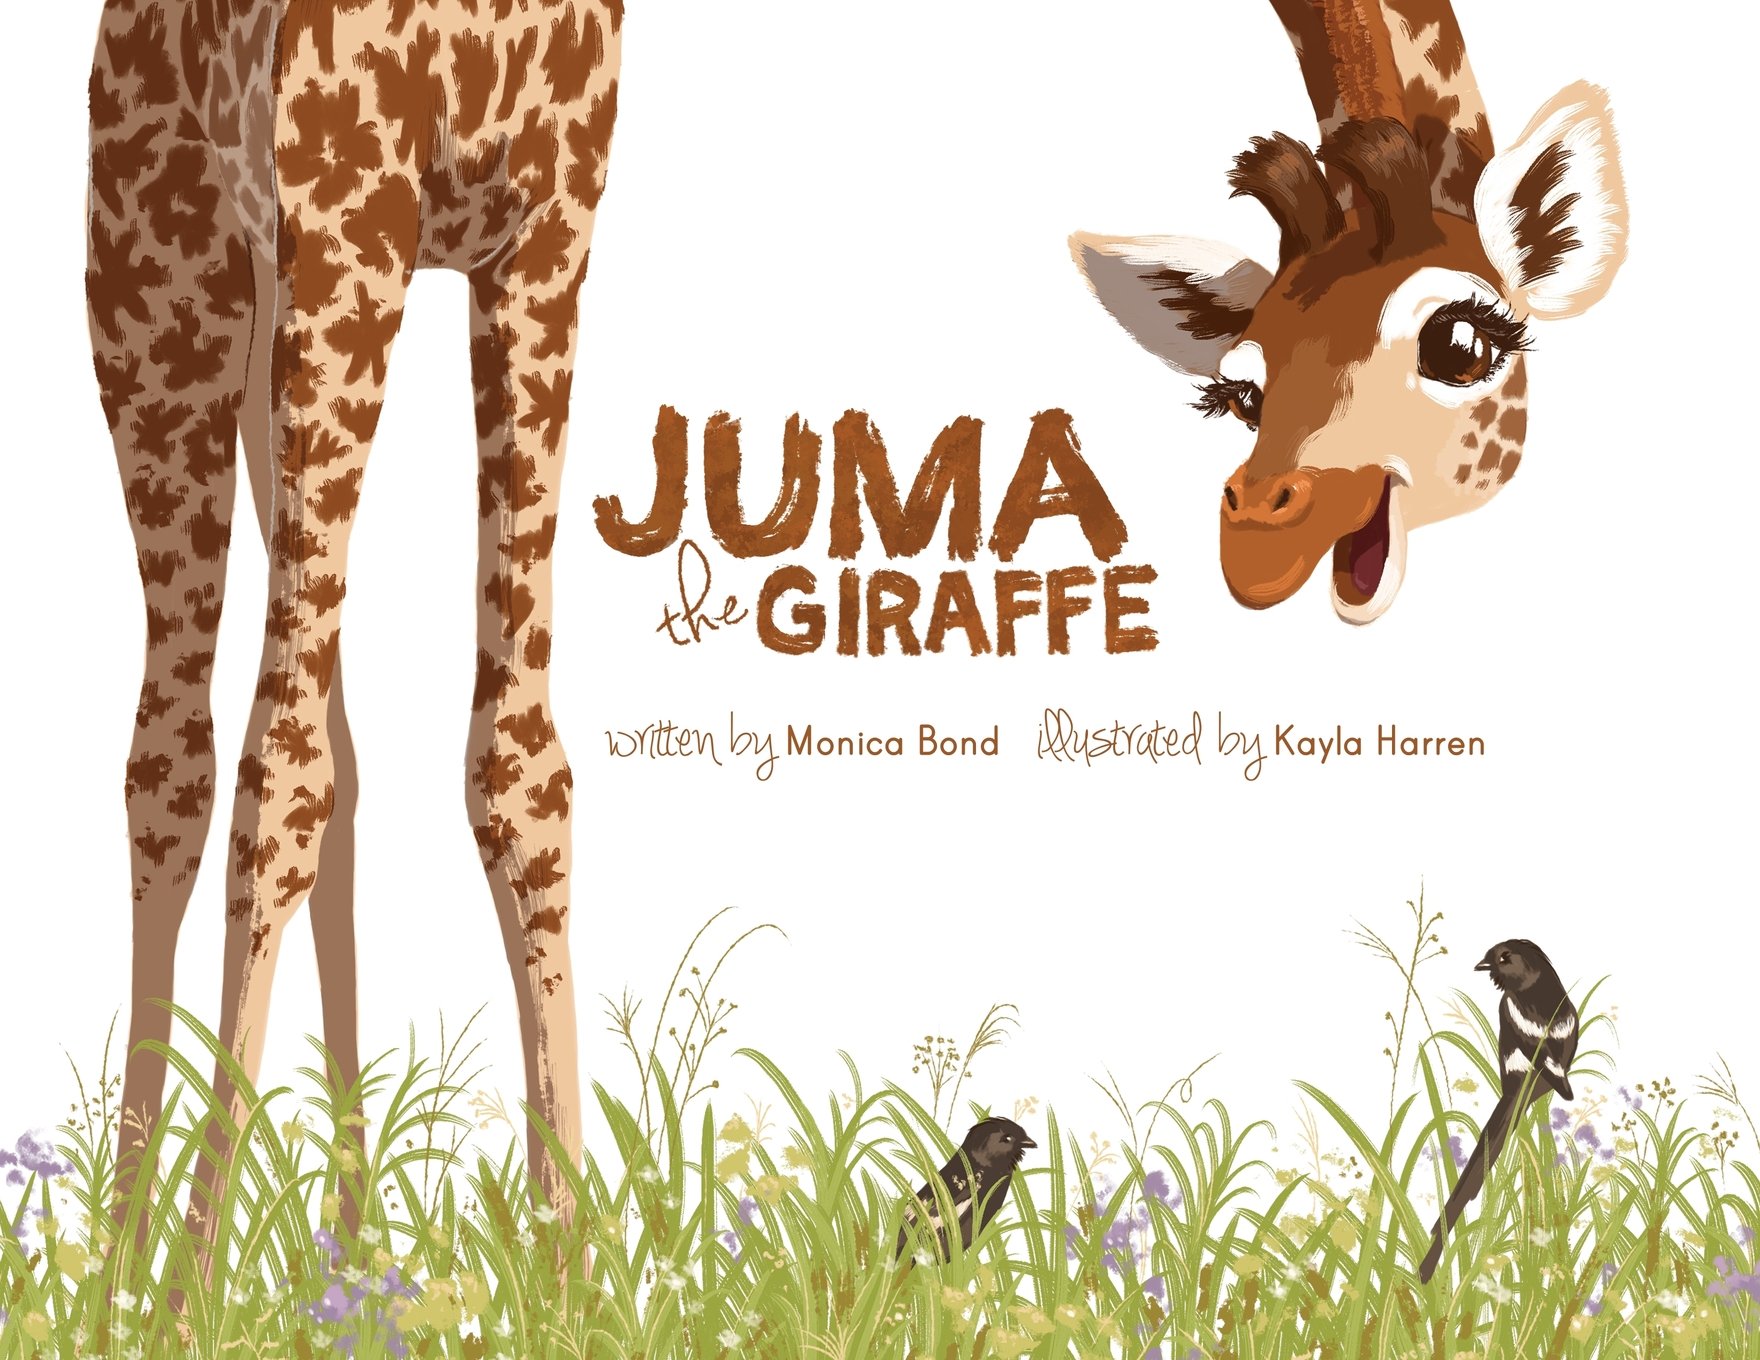 Cover of the book Juma the Giraffe. Features a giraffe standing in the grass and looking at the reader.